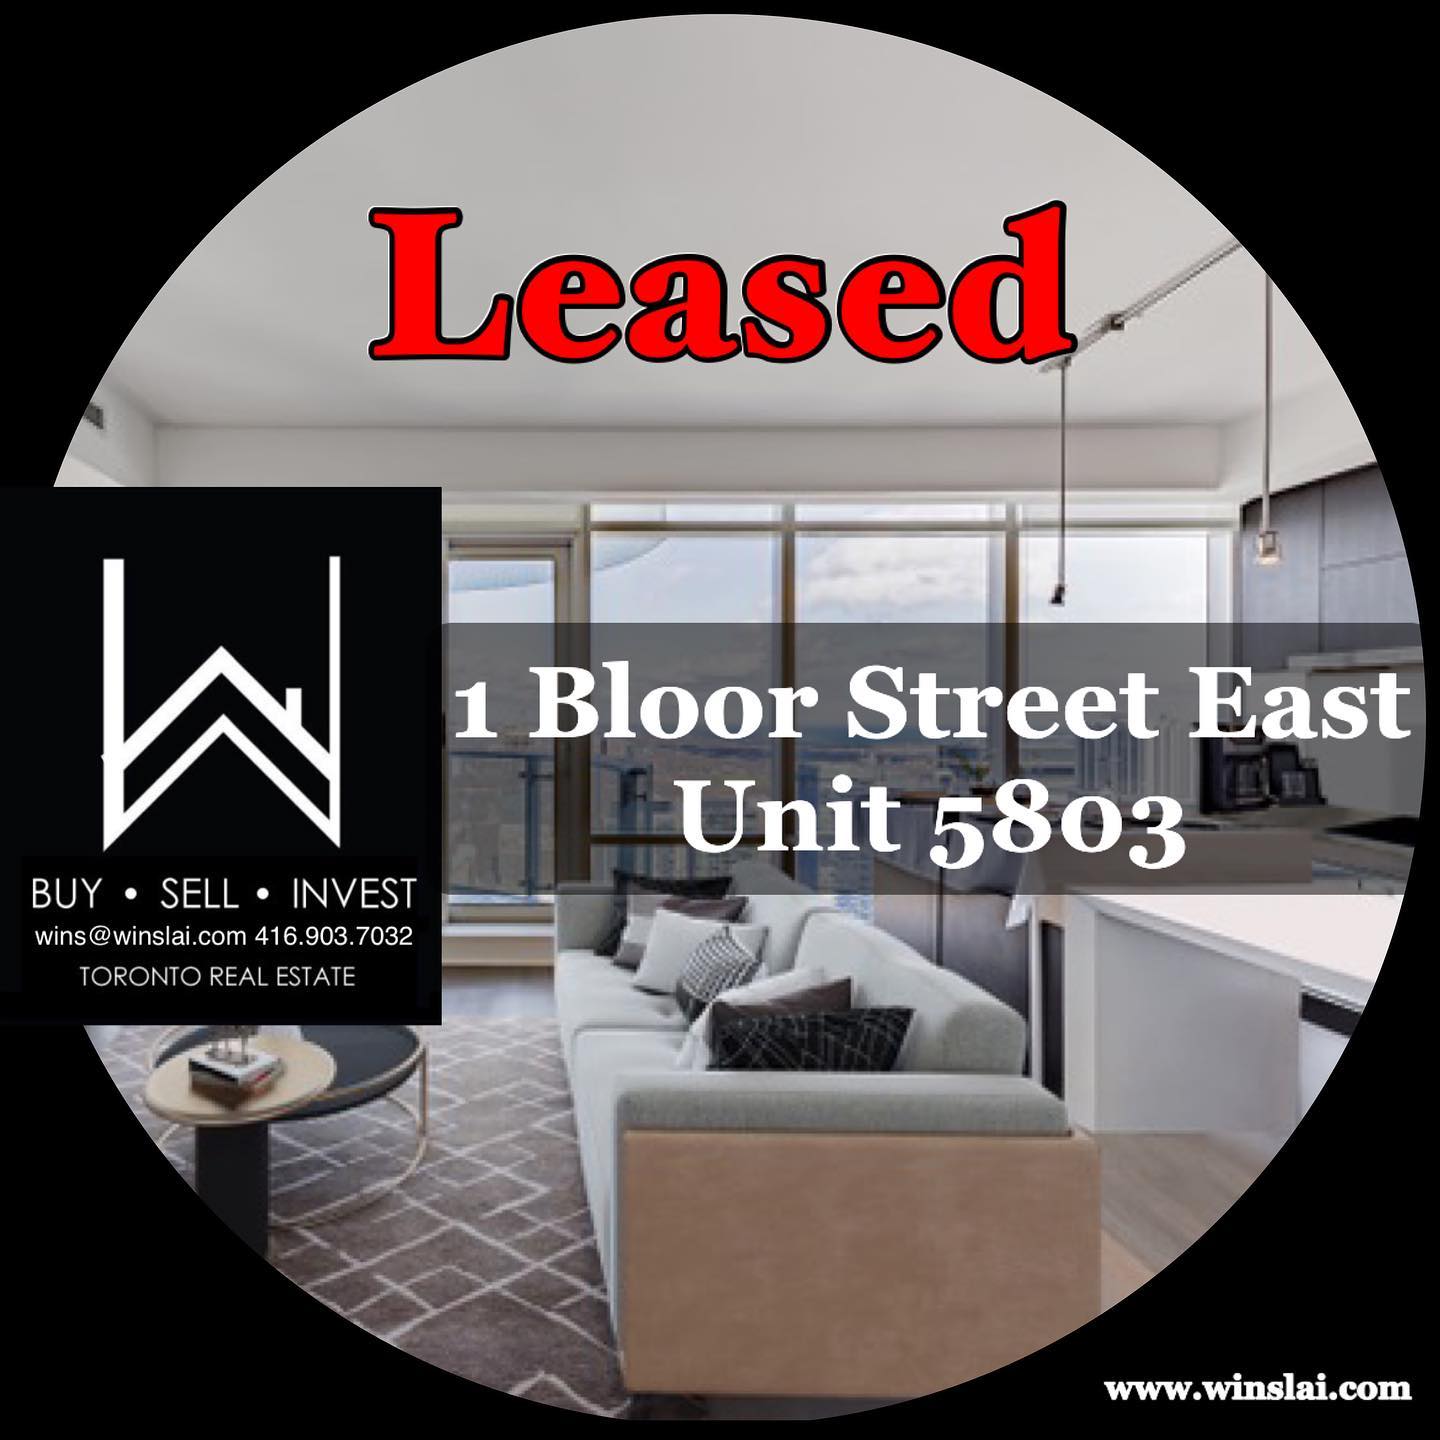 Leased flyer for 1 Bloor St E Unit 5803.